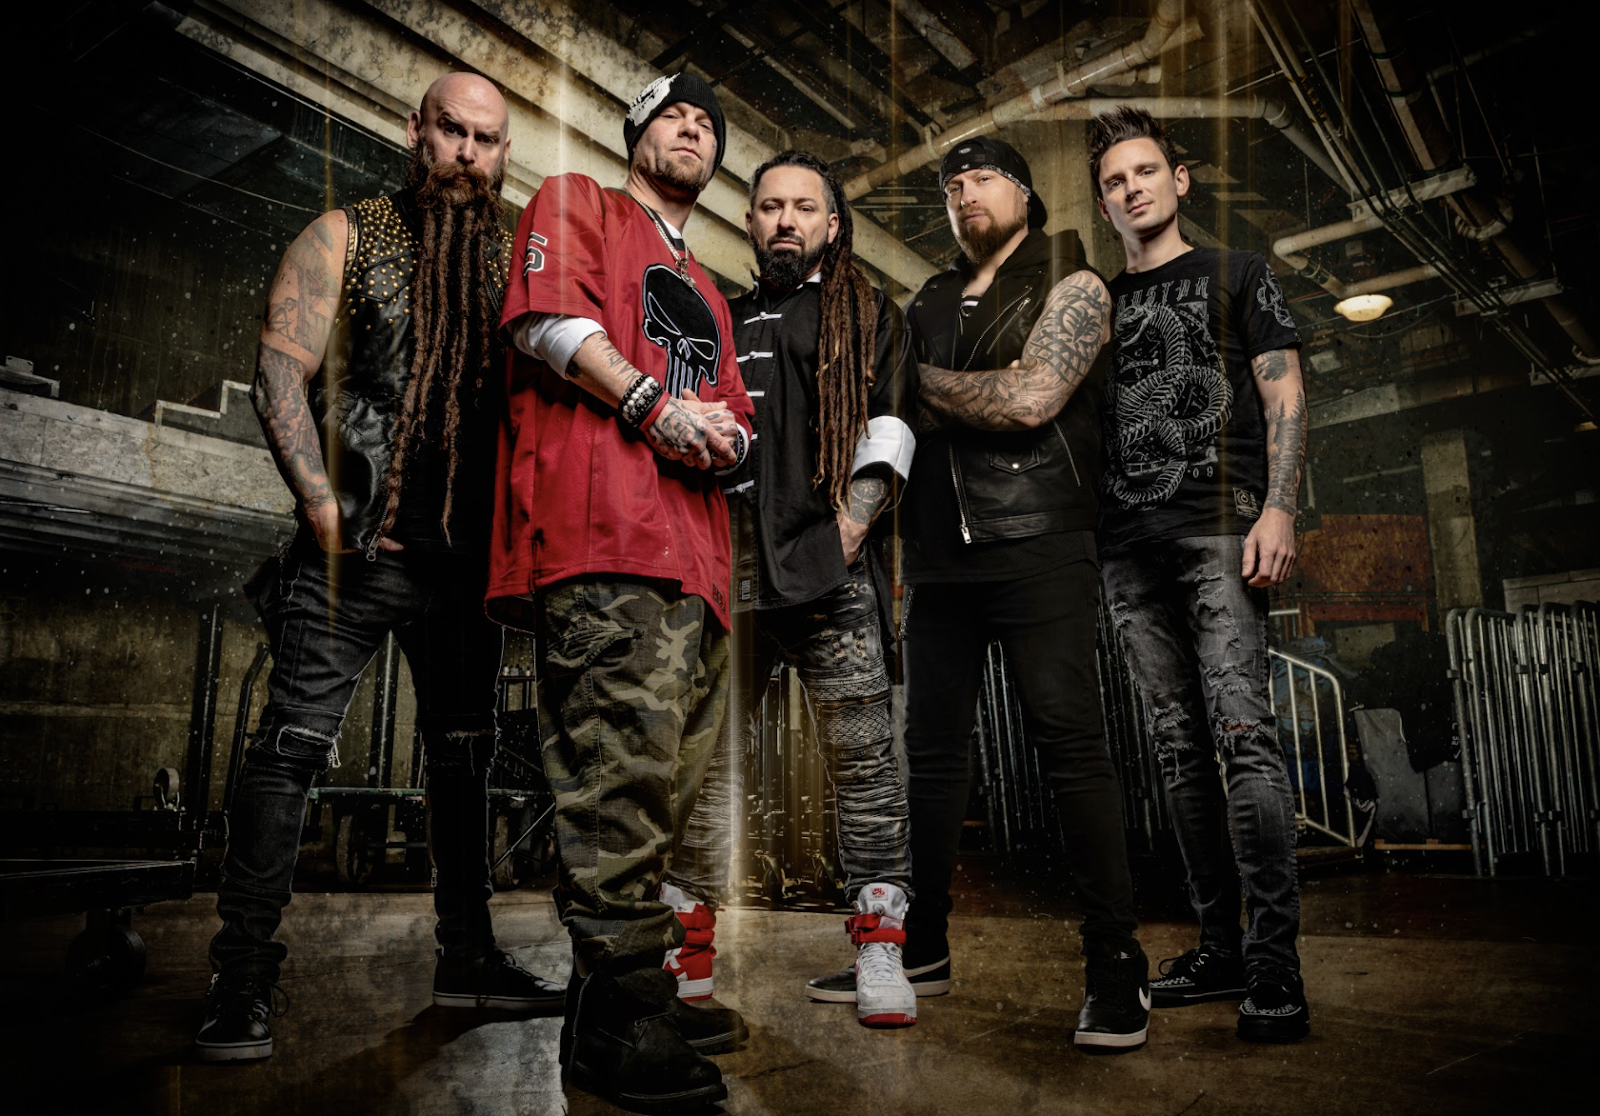 ffdp wash it all away with other band